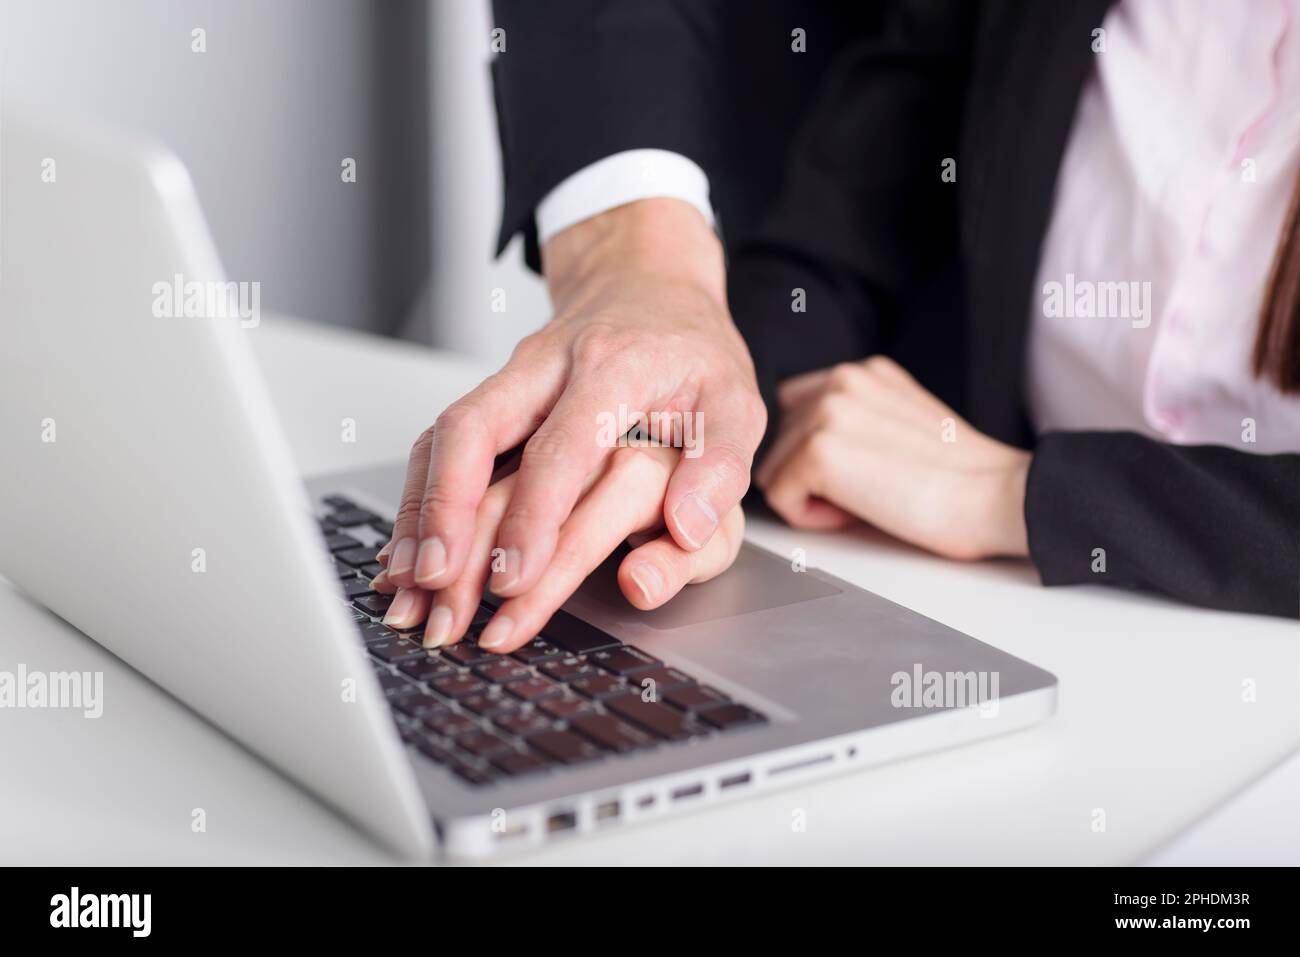 Business man touching woman hand feeling disgusted and uncomfortable. Sexual harassment inappropriate at office Stock Photo